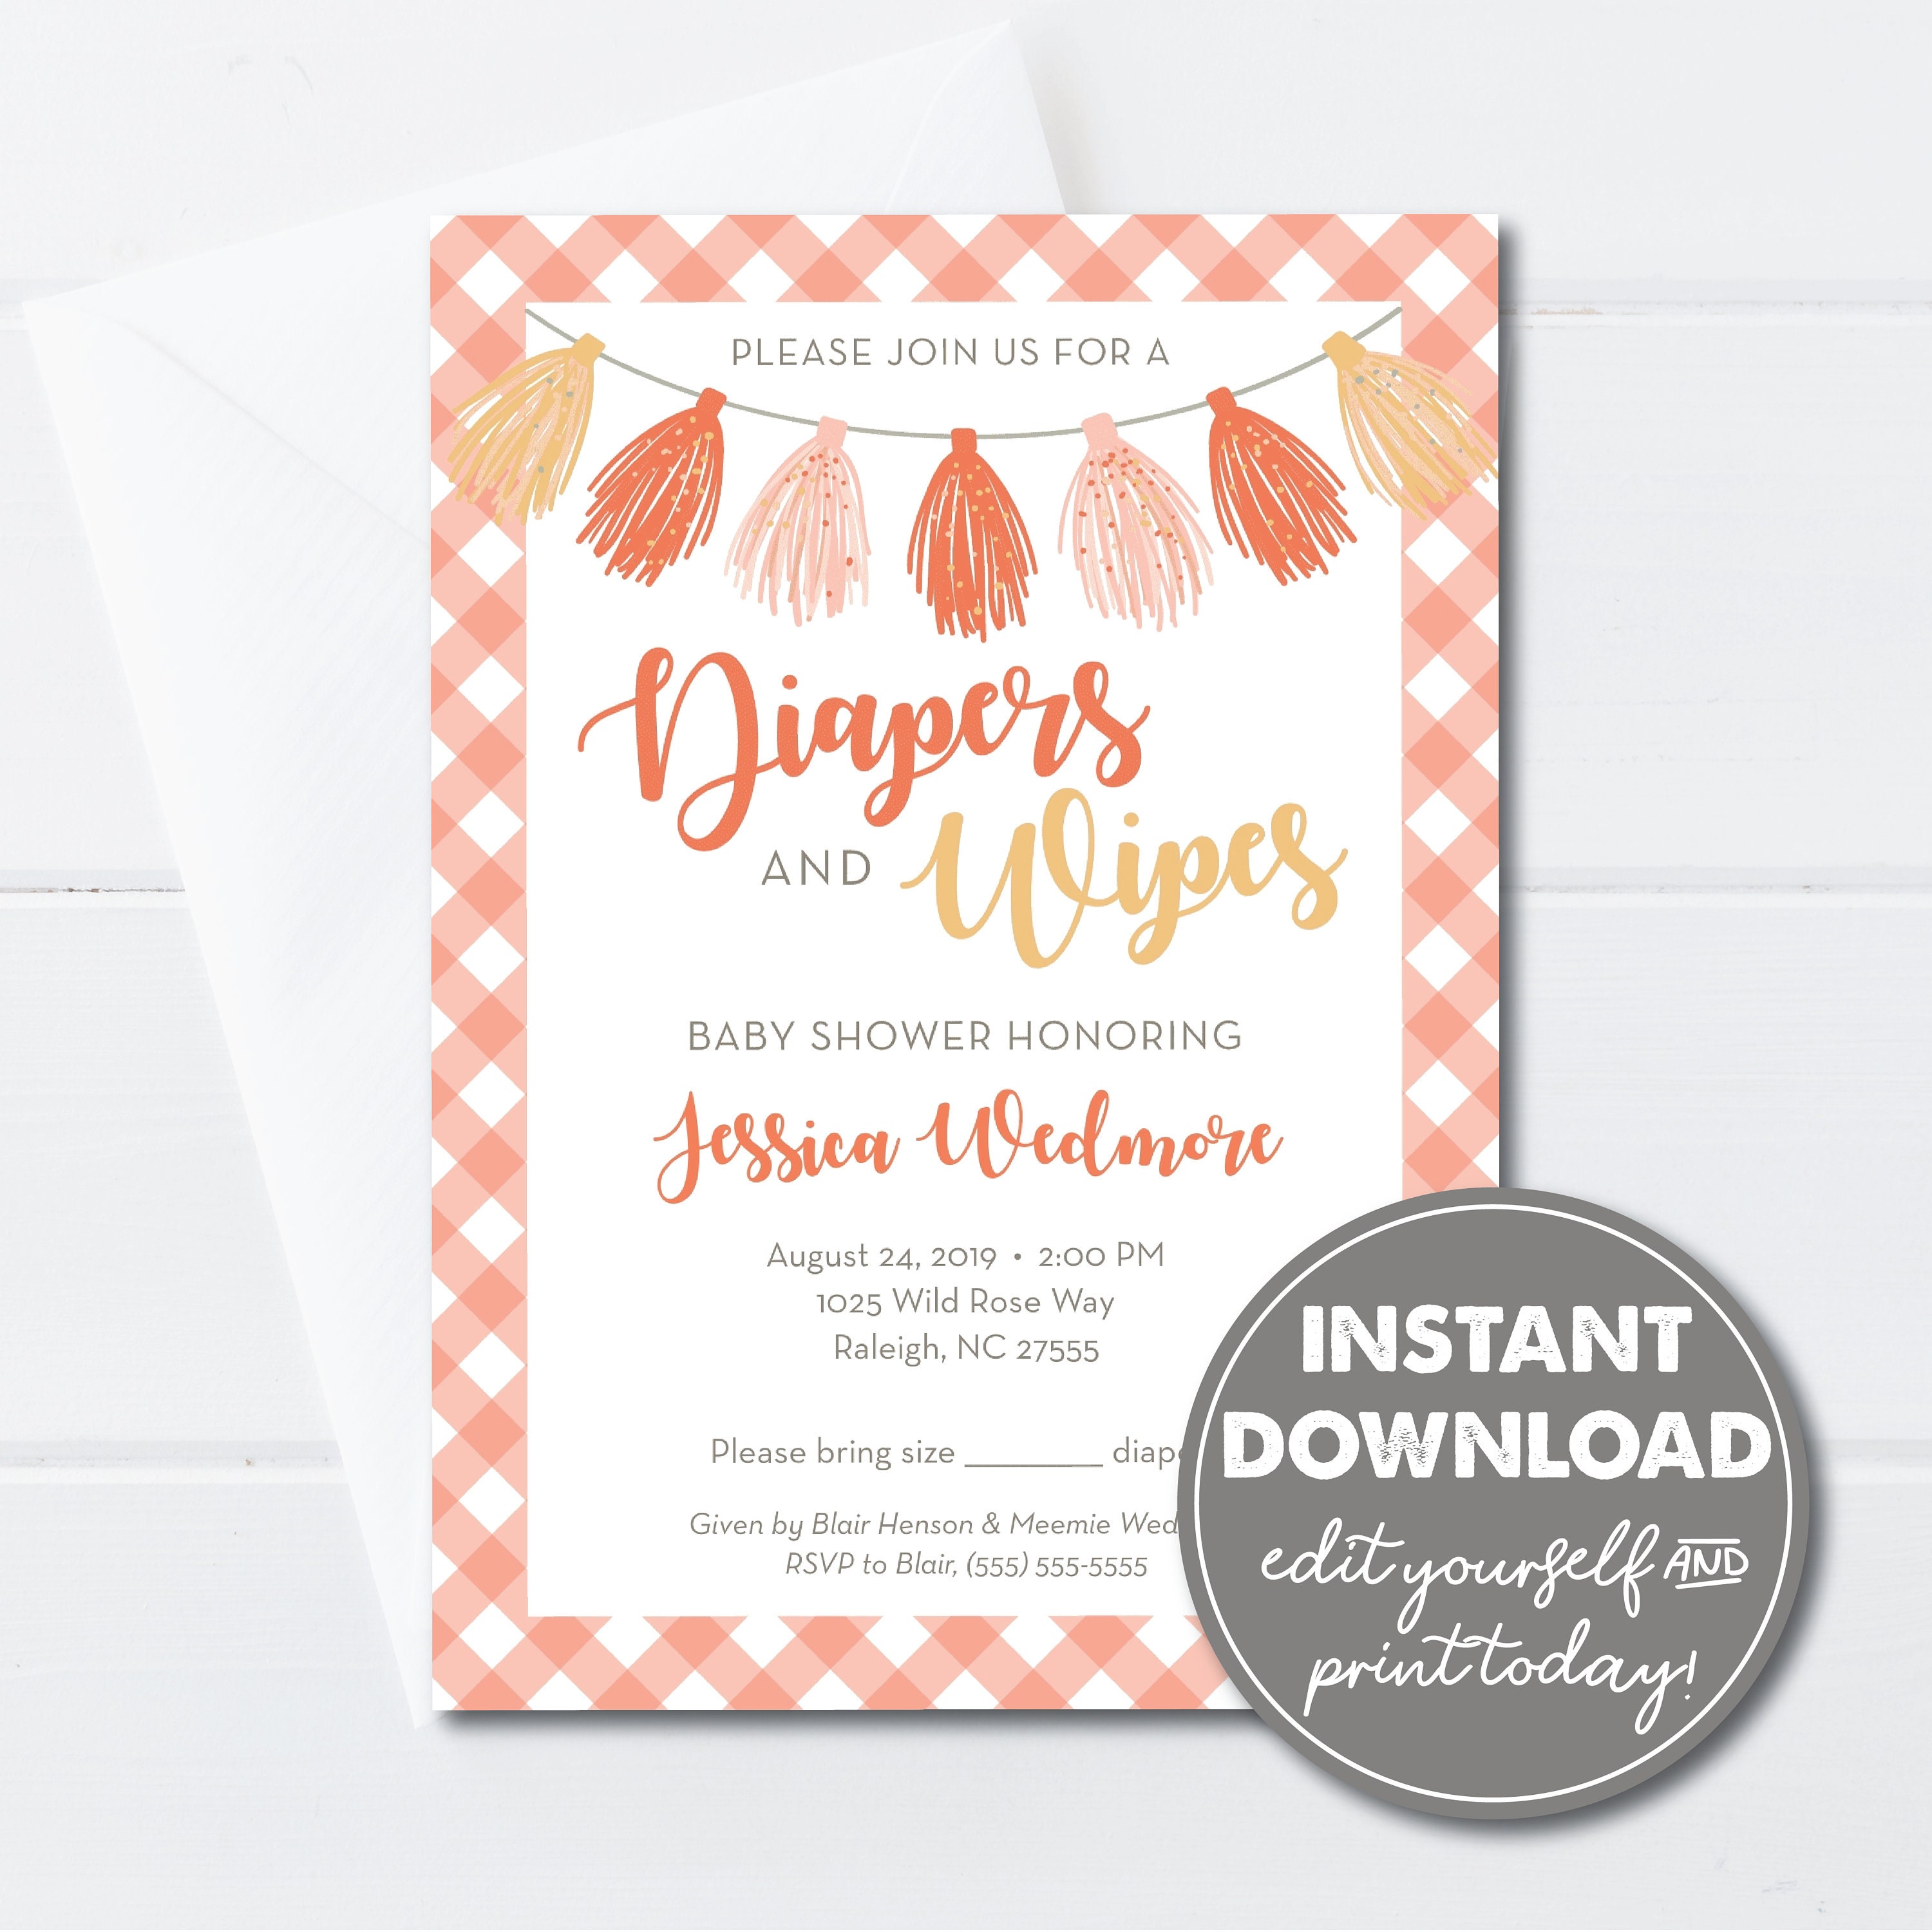 Editable Diaper and Wipes Baby Shower Invitation Template | Etsy